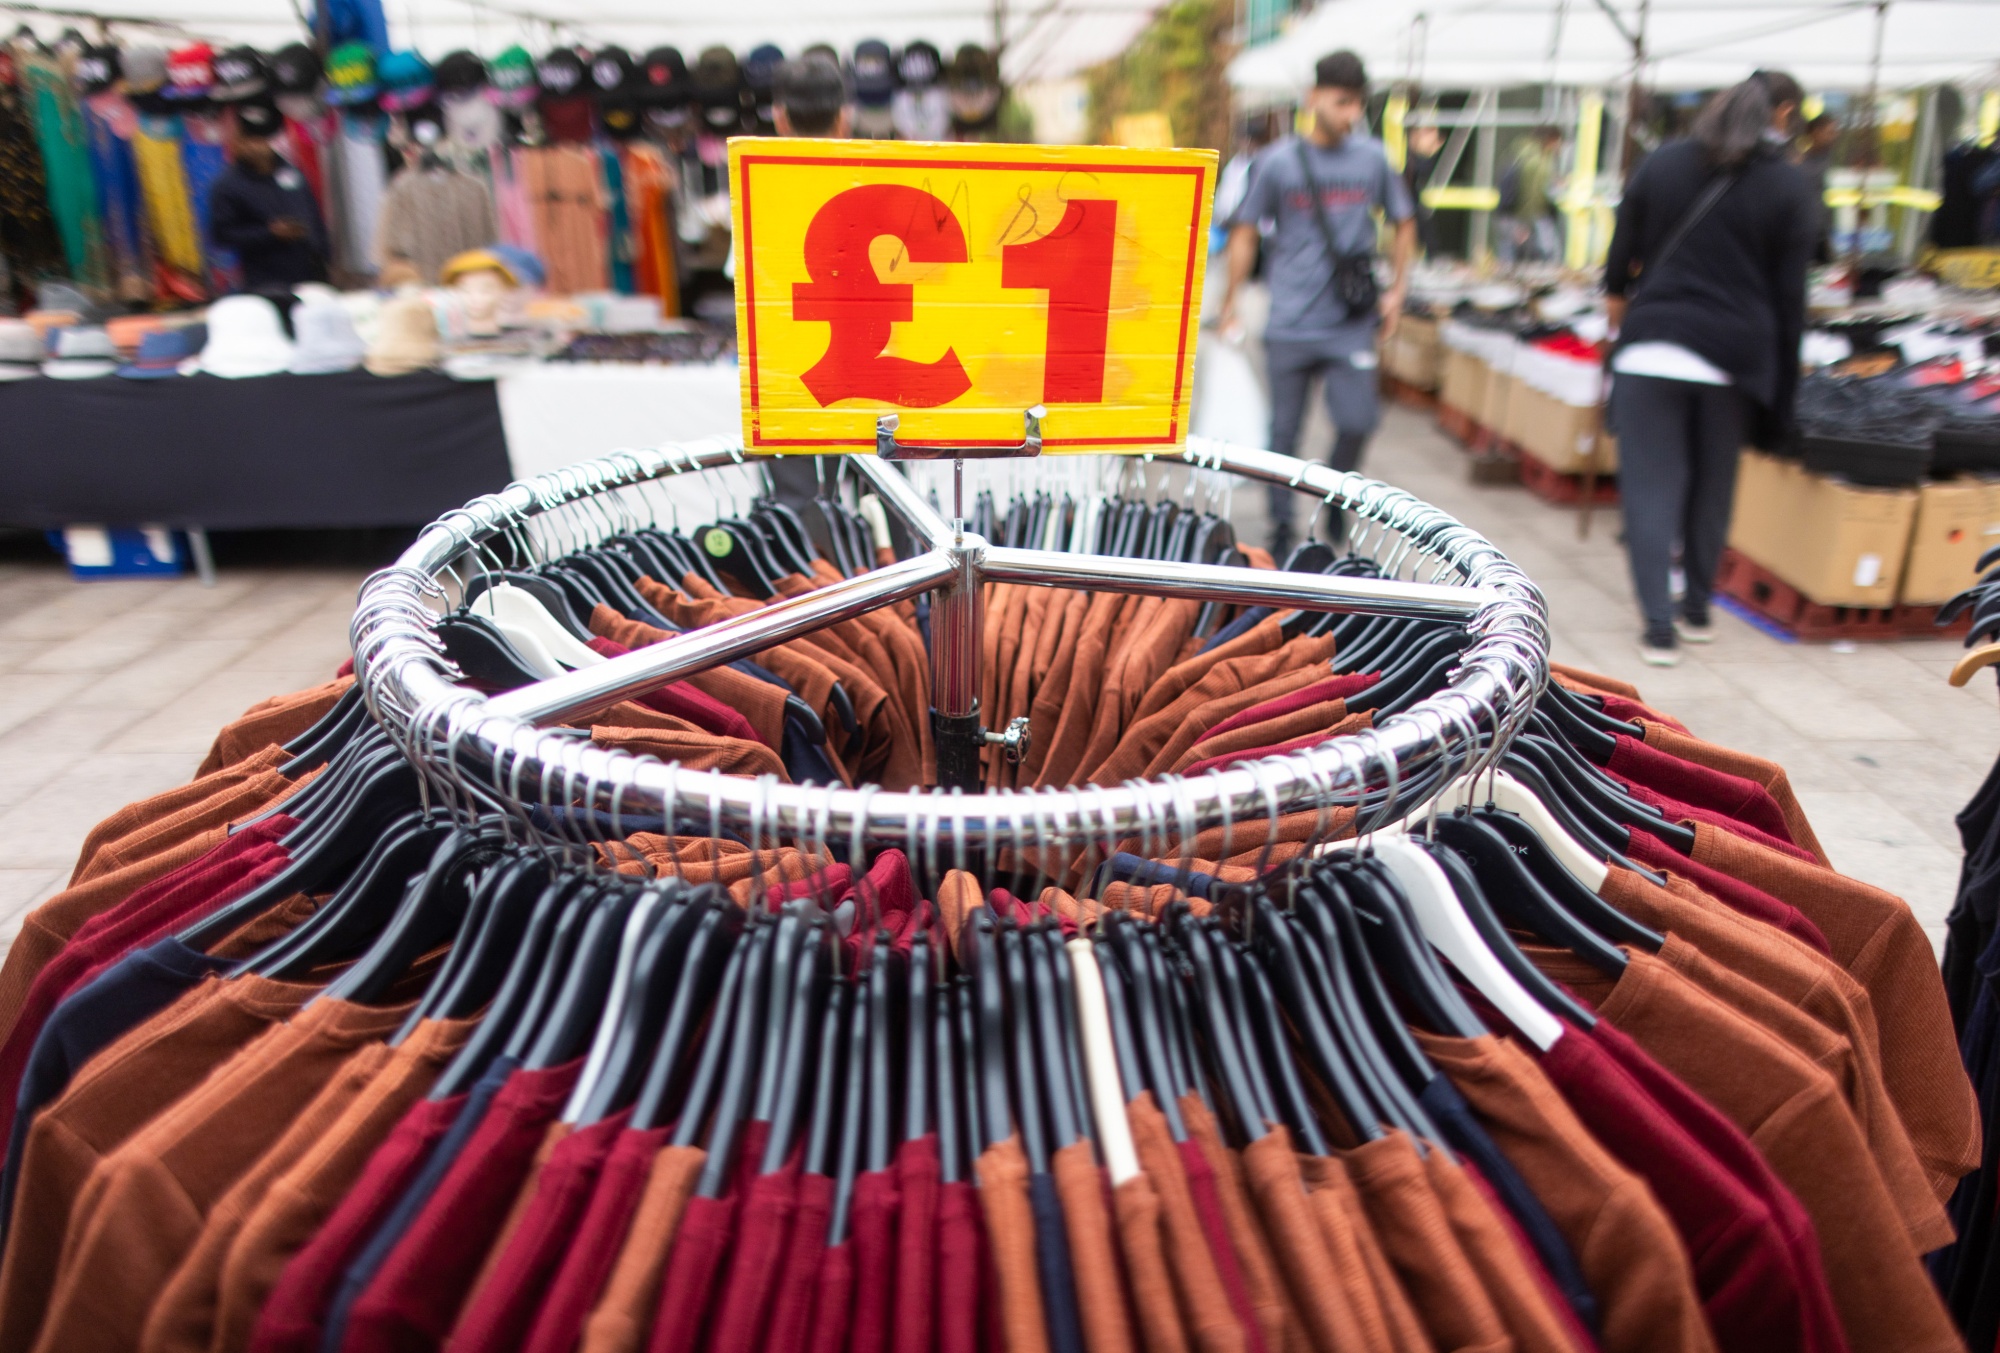 A&nbsp;clothing rack on a market stall in Barking, UK.